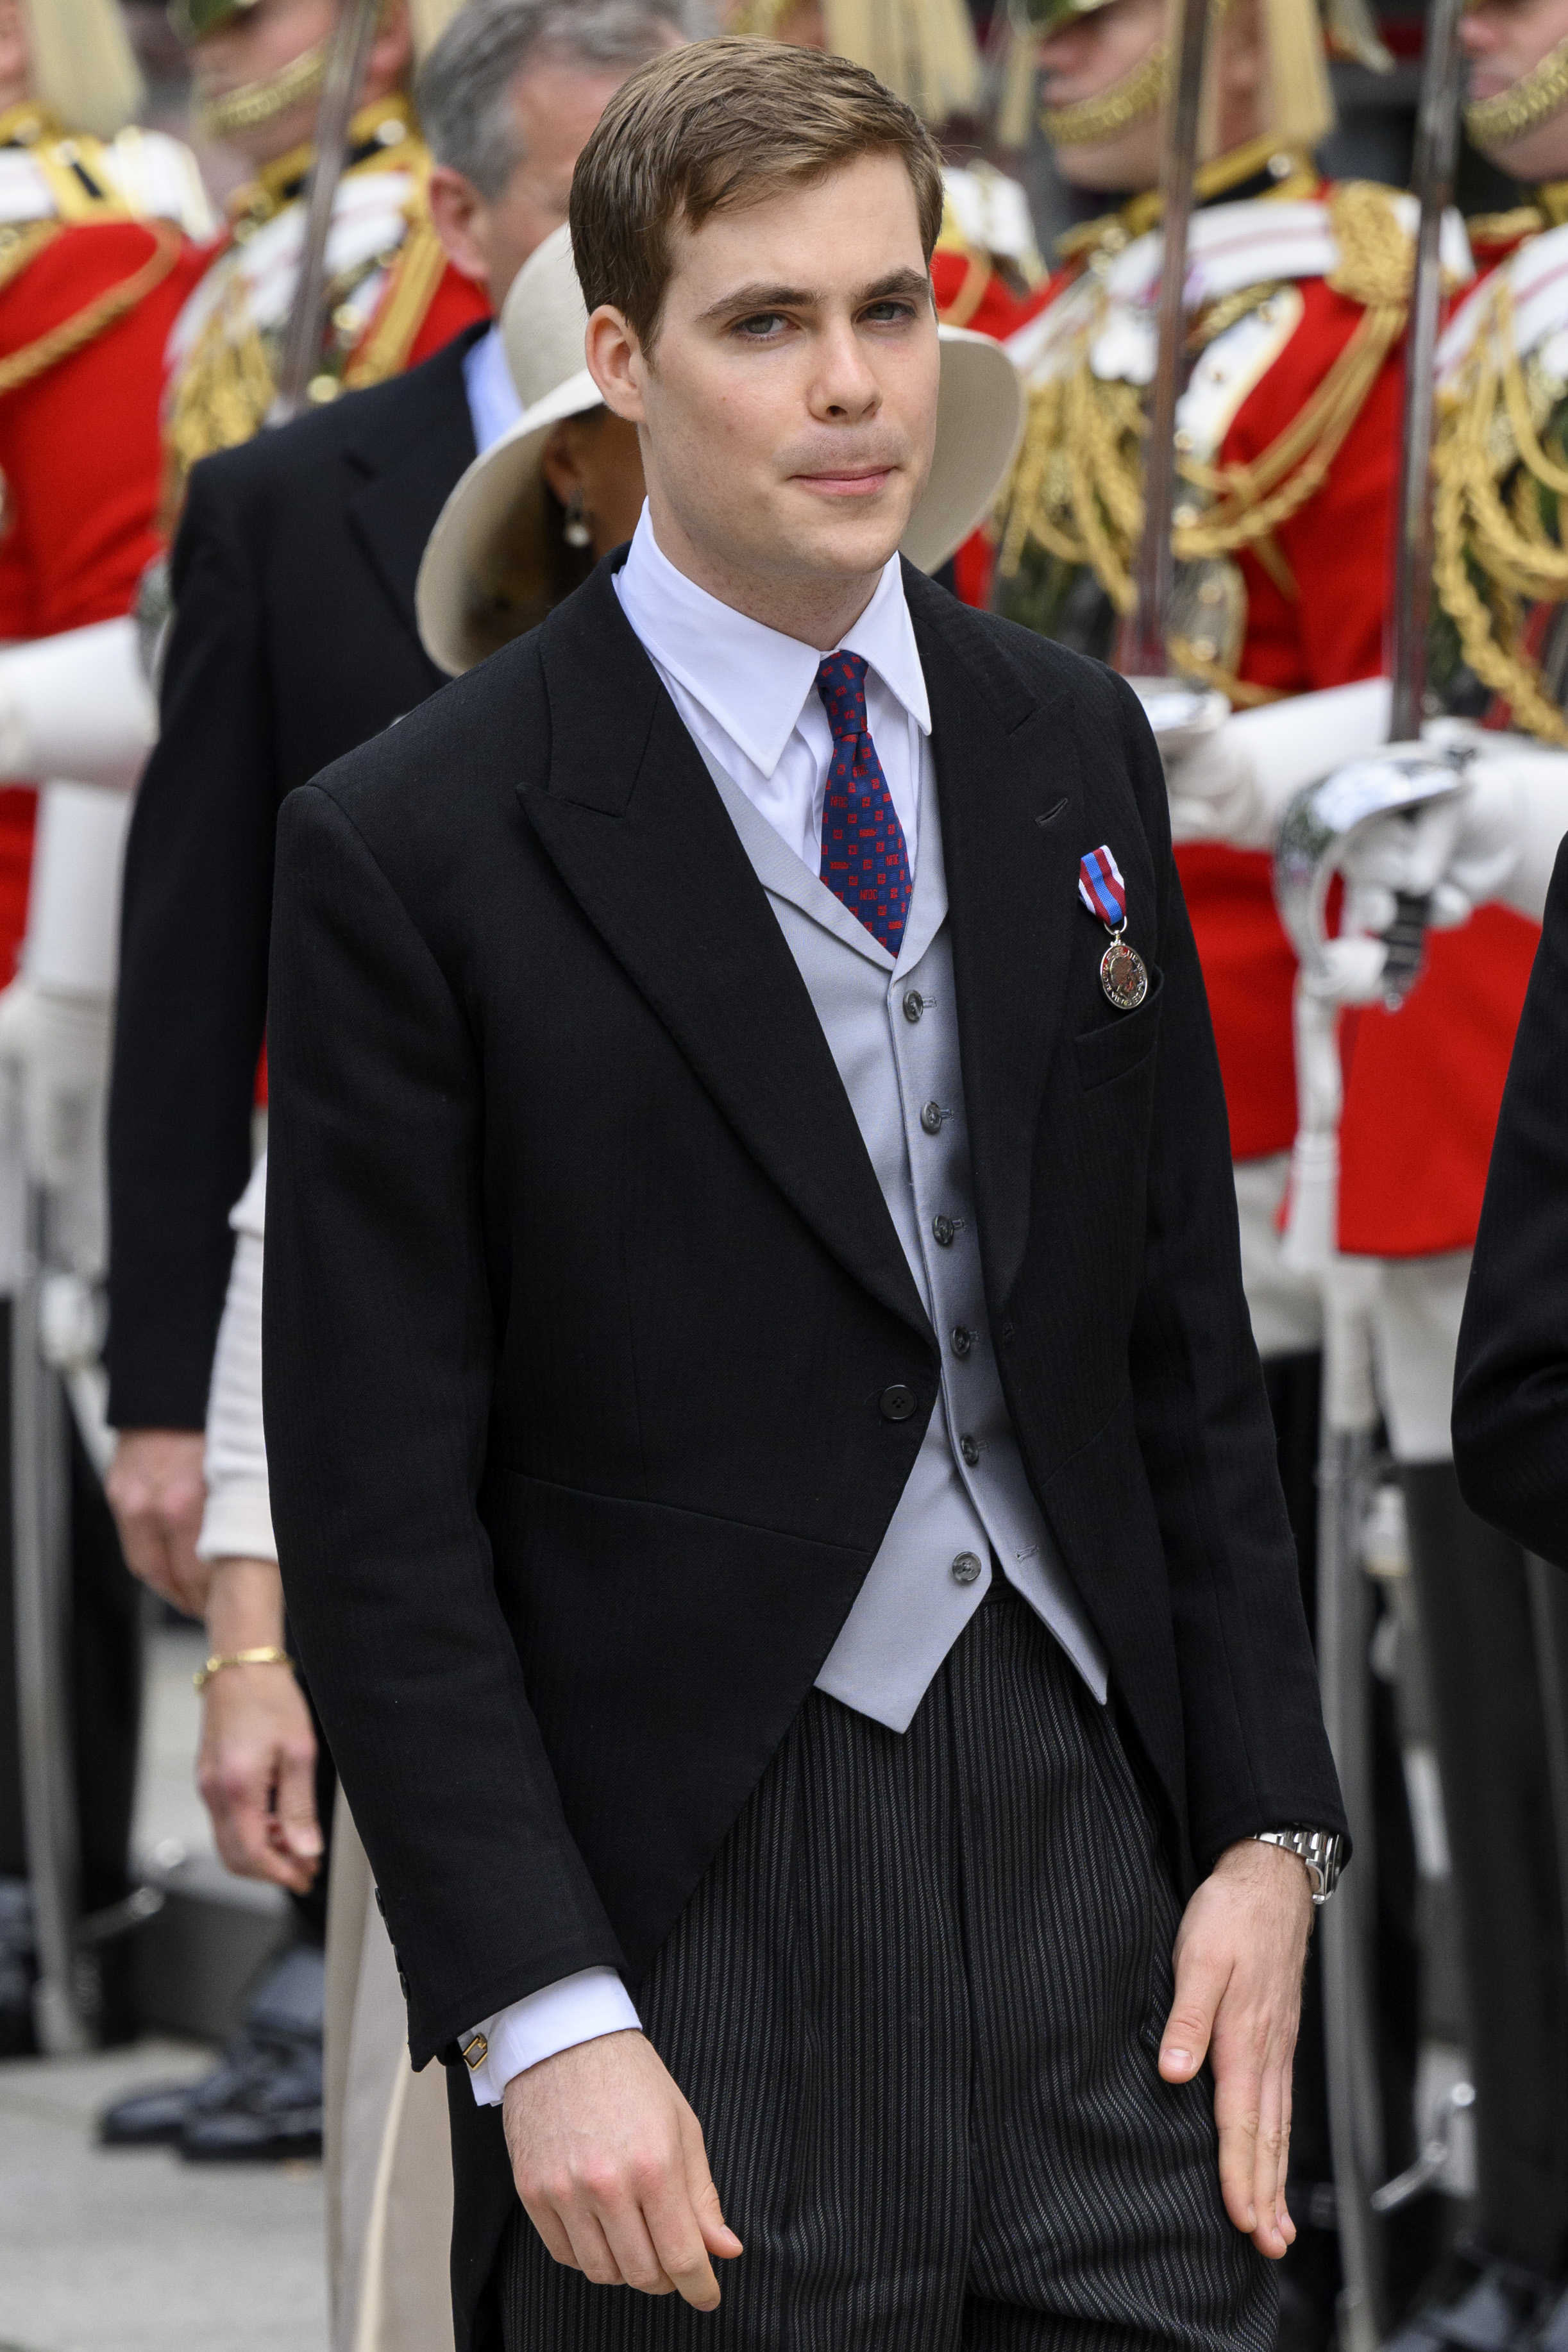 <p>In the 26th spot is David Armstrong-Jones's son, Charles Armstrong-Jones, Viscount Linley. A viscount is a nobleman who is one level below an earl and one above a baron. He is the only one of the late Princess Margaret's grandchildren who has a title.</p>